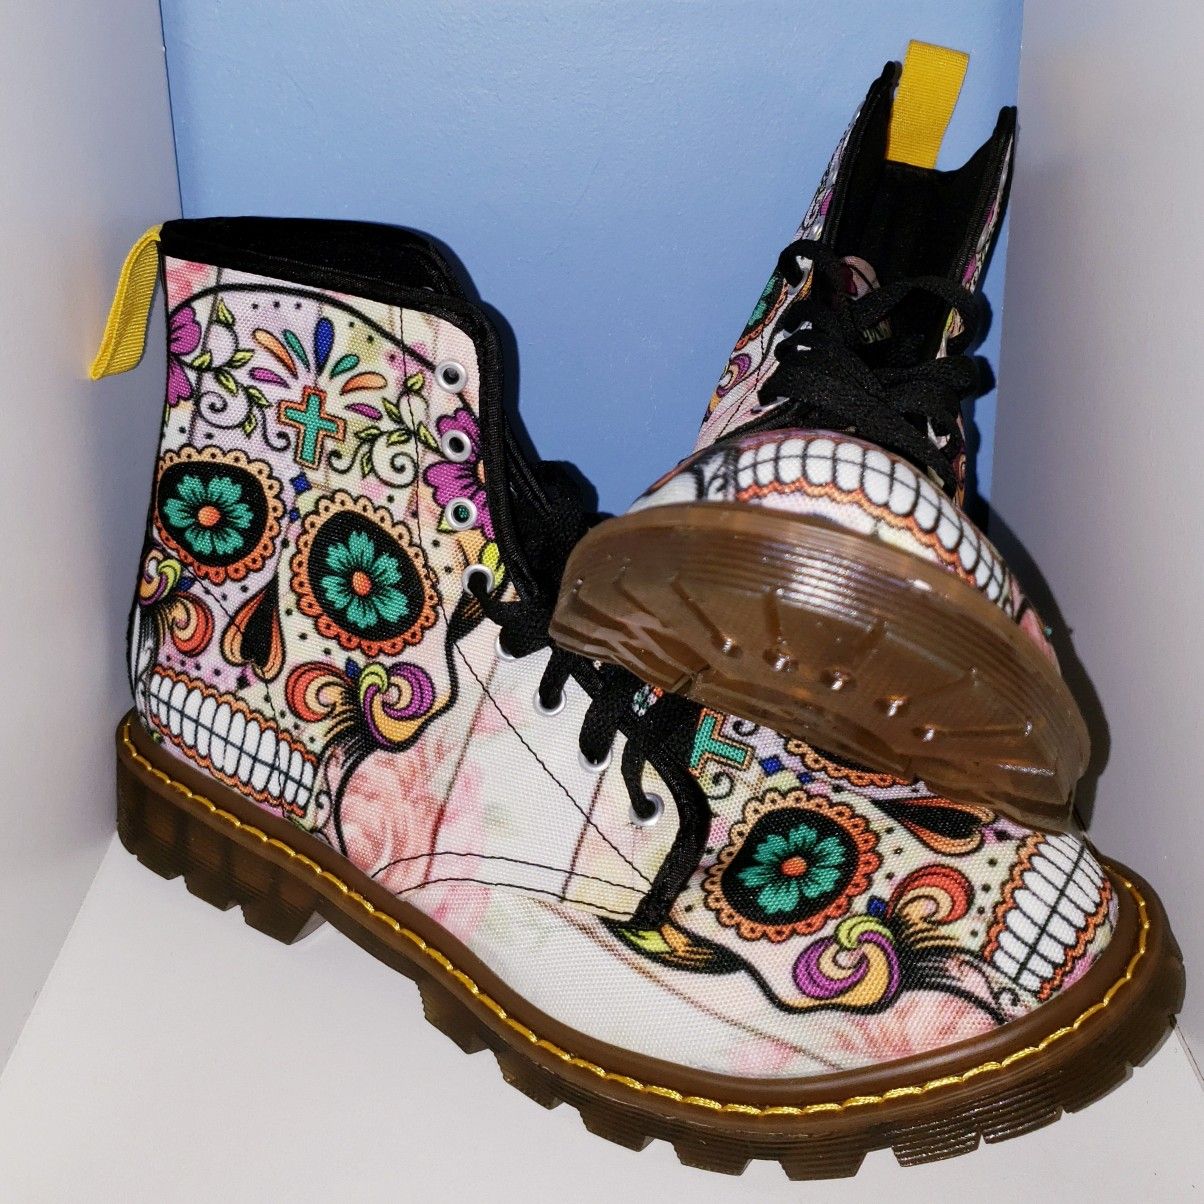 Lace Up SKULL MULTICOLORED Fashion Combat Boots for WOMEN size 11